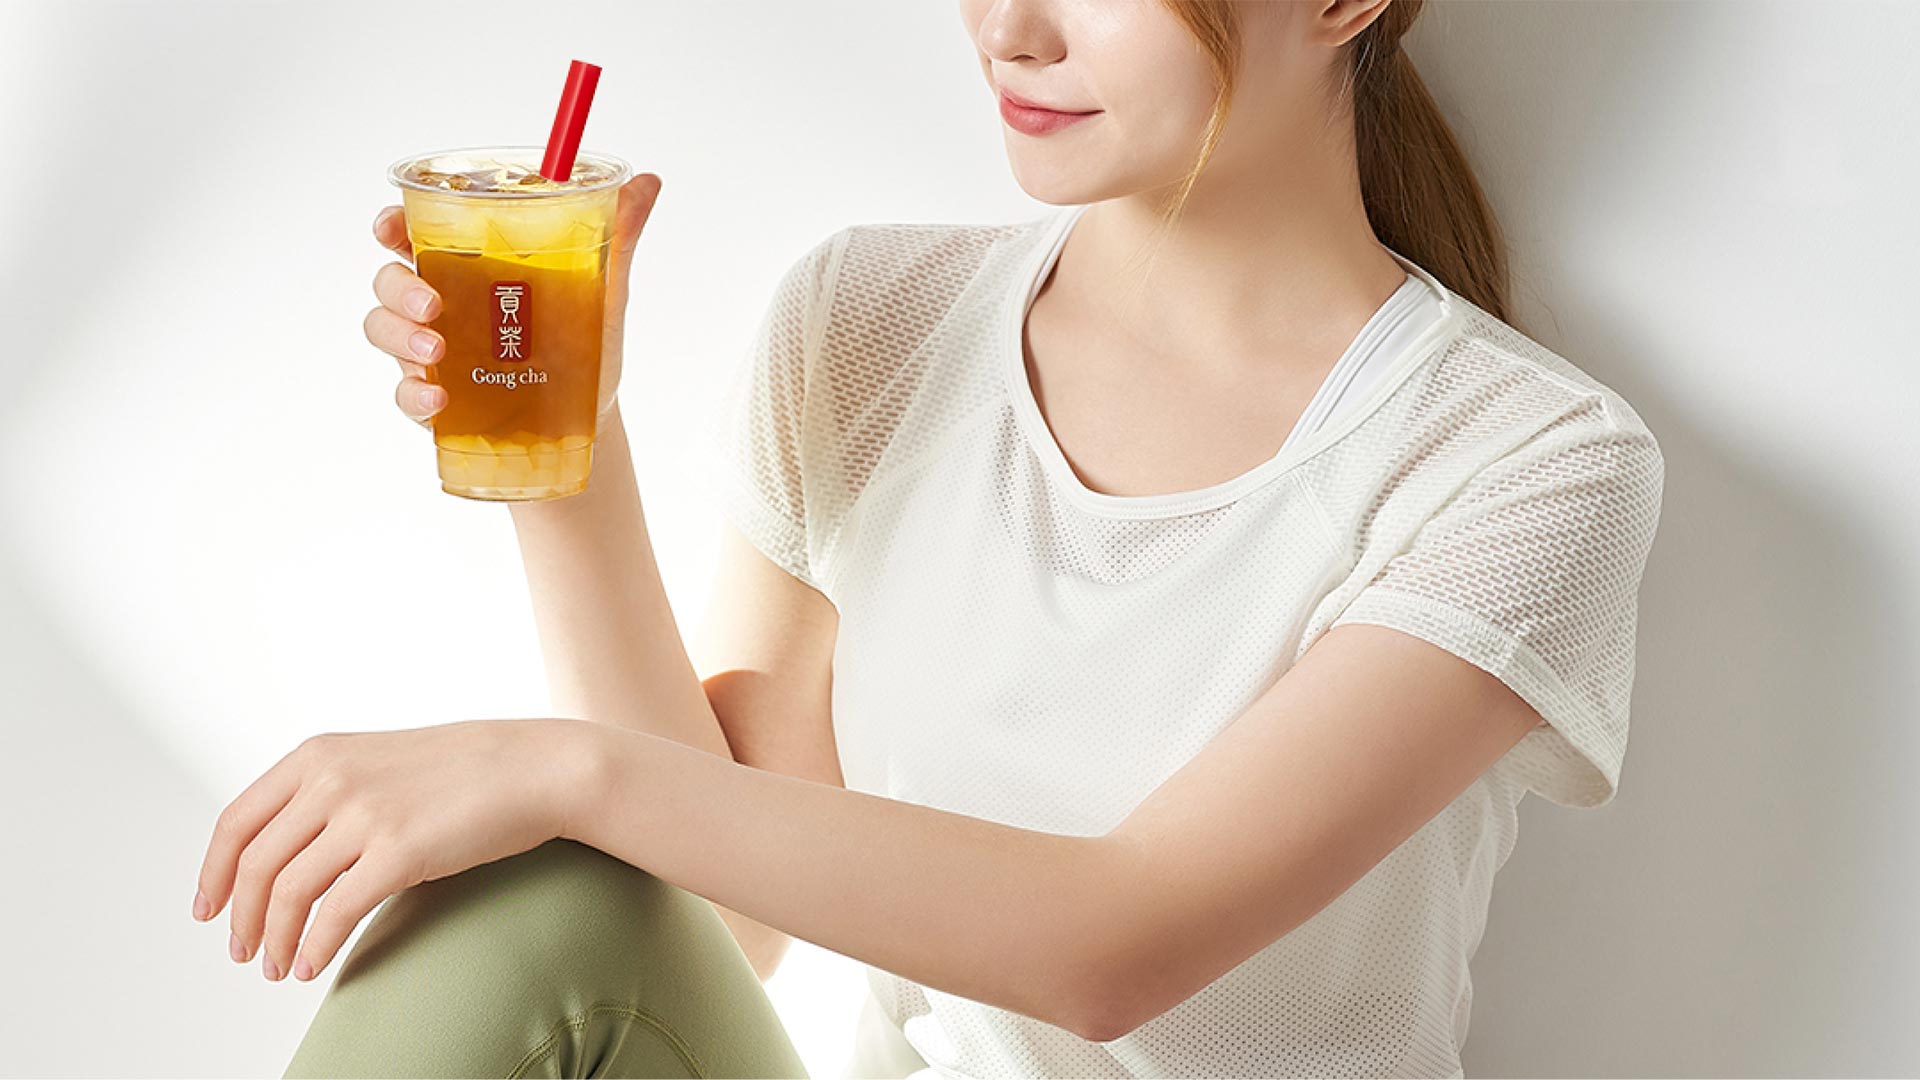 Woman holding a Gong cha drink